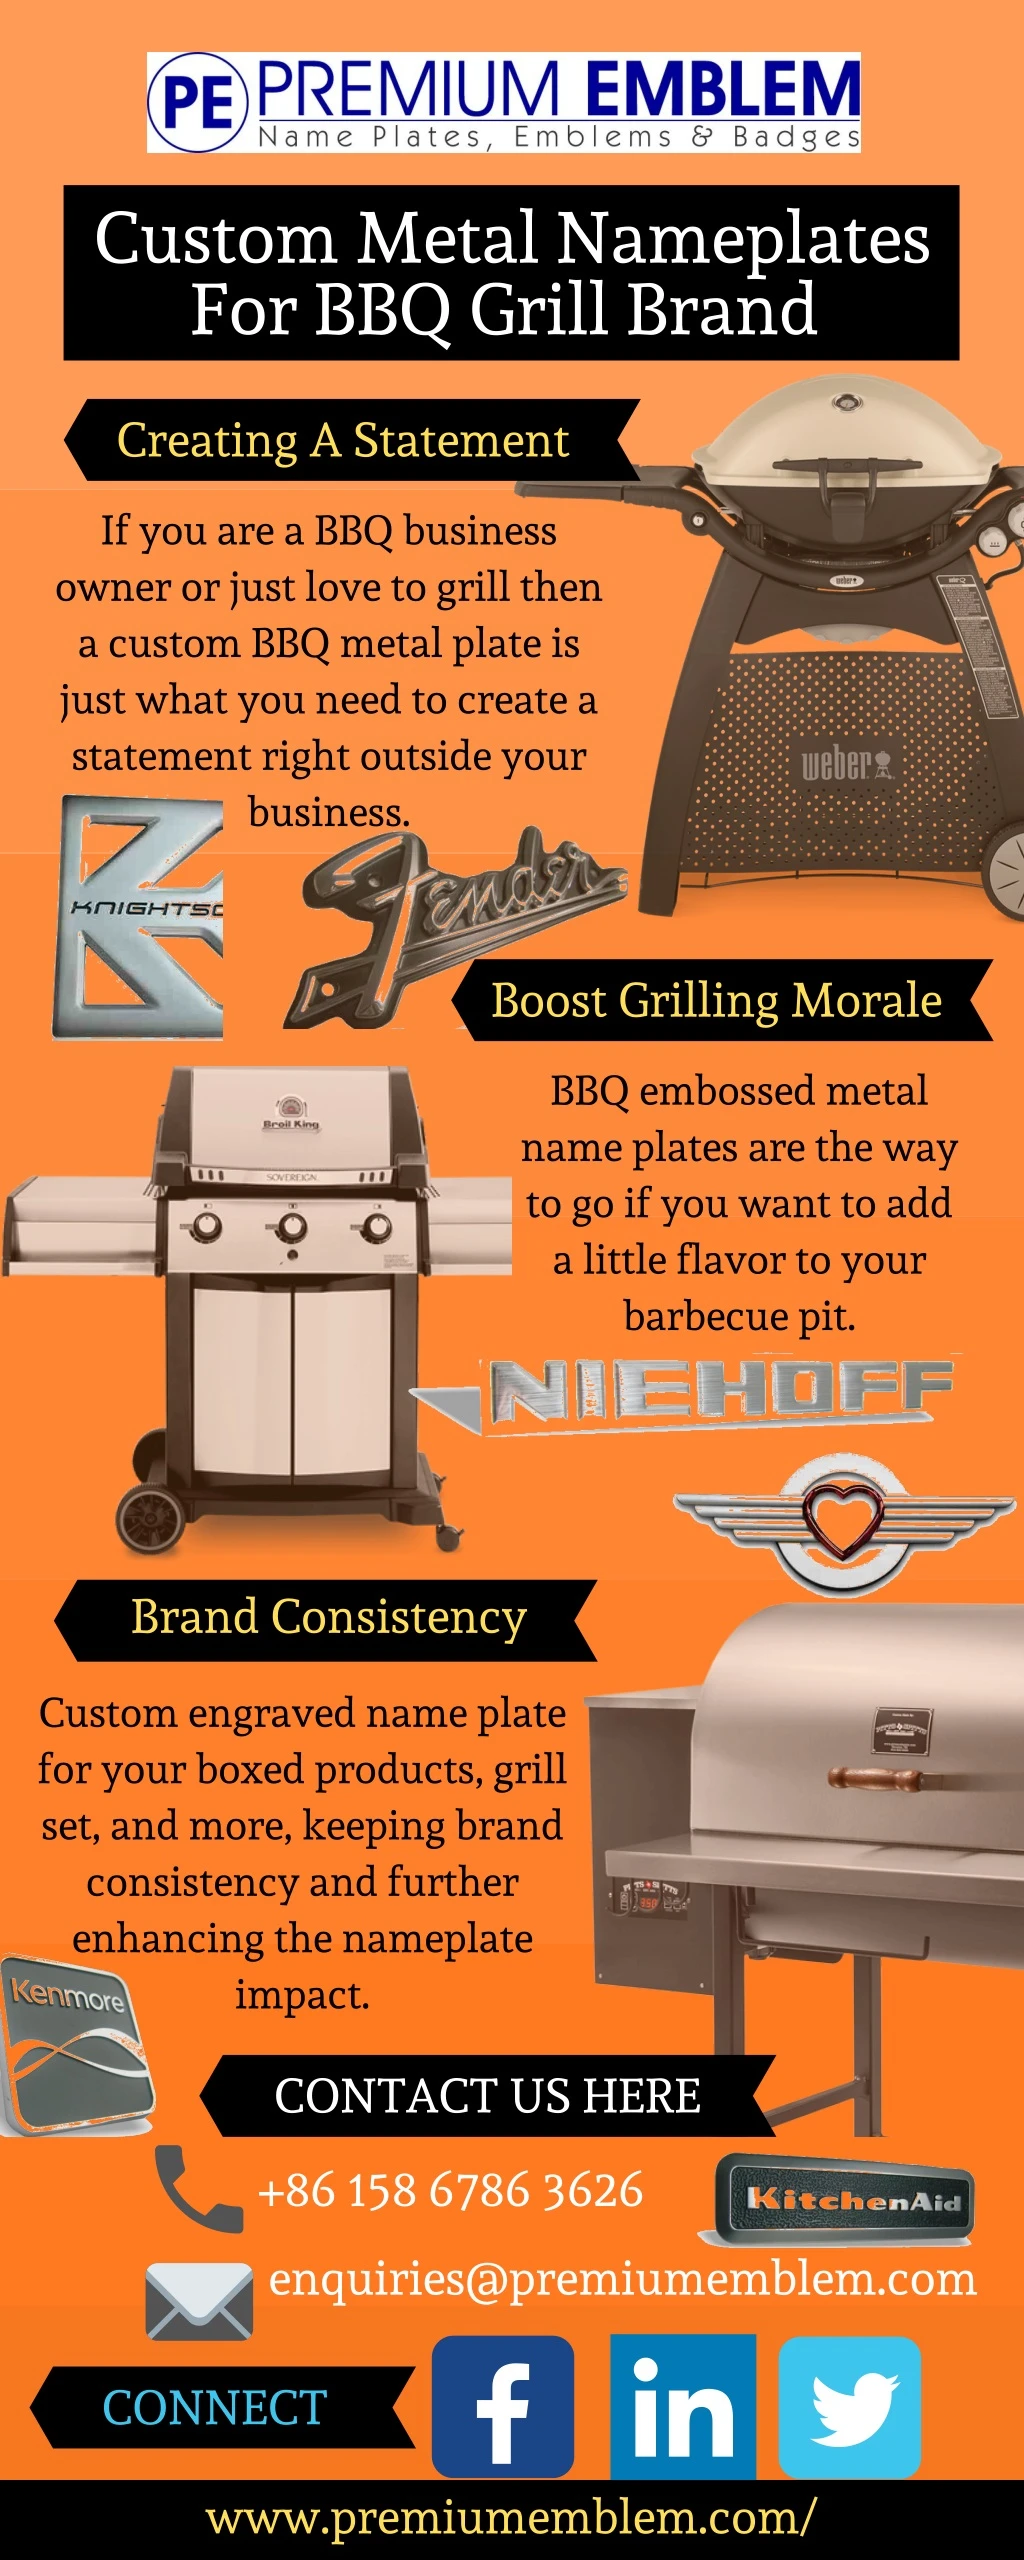 custom metal nameplates for bbq grill brand